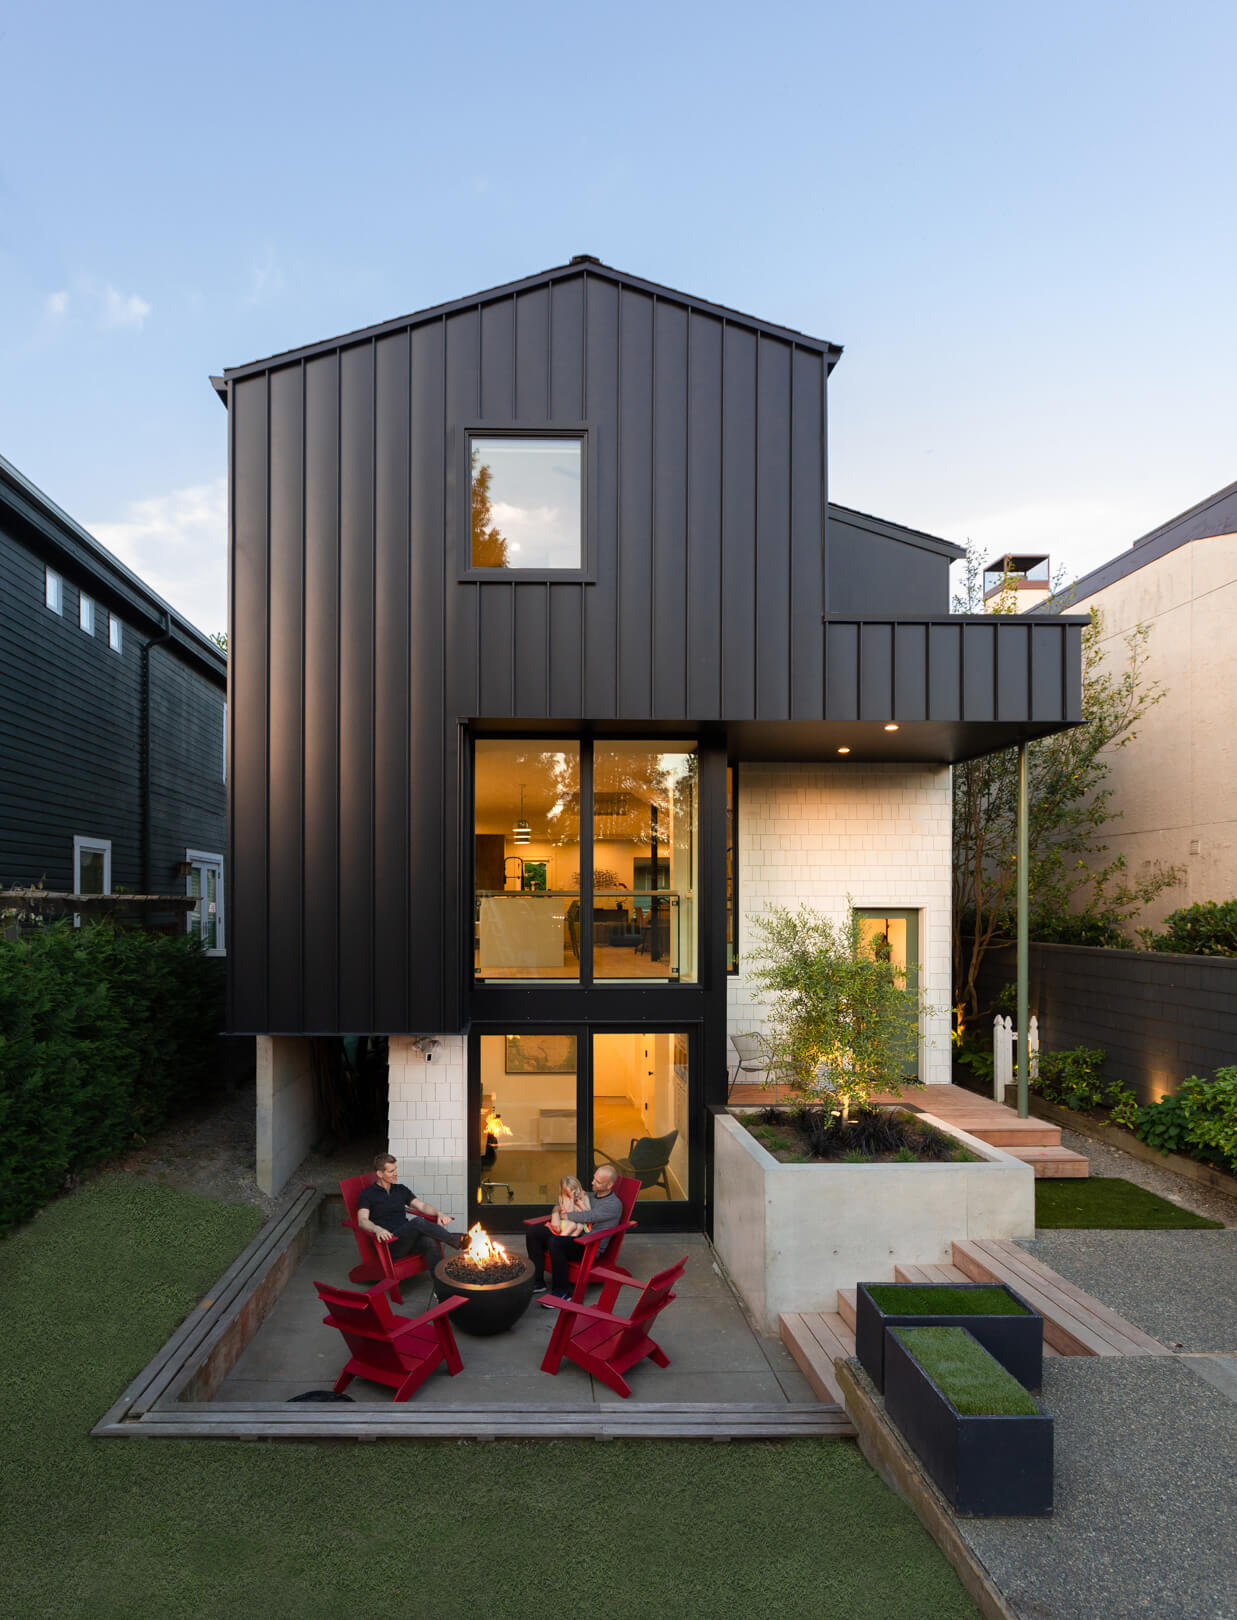 a metal-clad addition and yard at the rear of a home redesigned by best practice